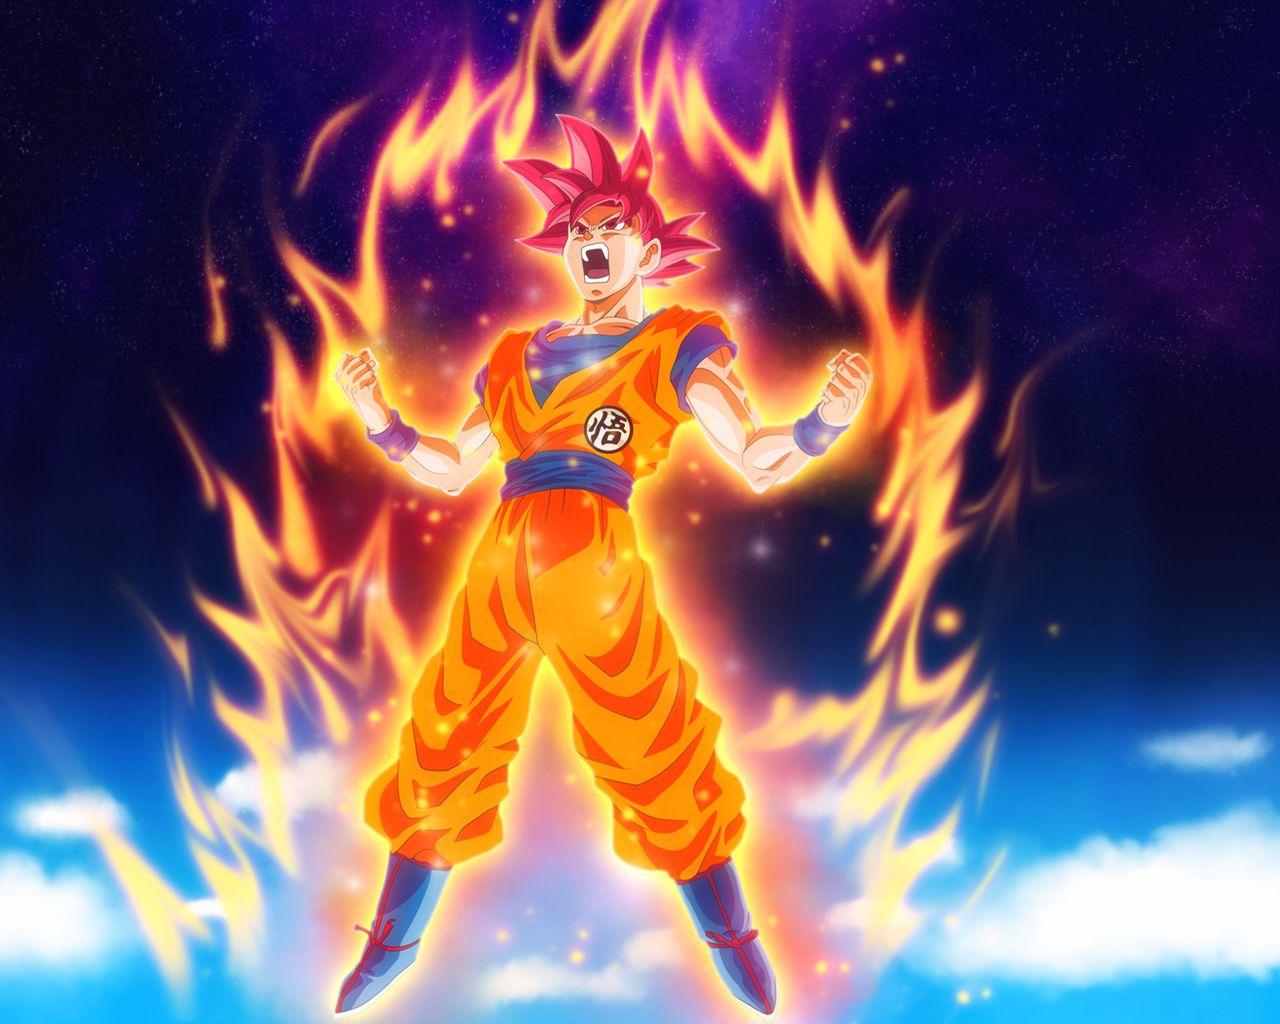 DBZ Super Goku Anime Wallpaper Security Lock APK for Android Download